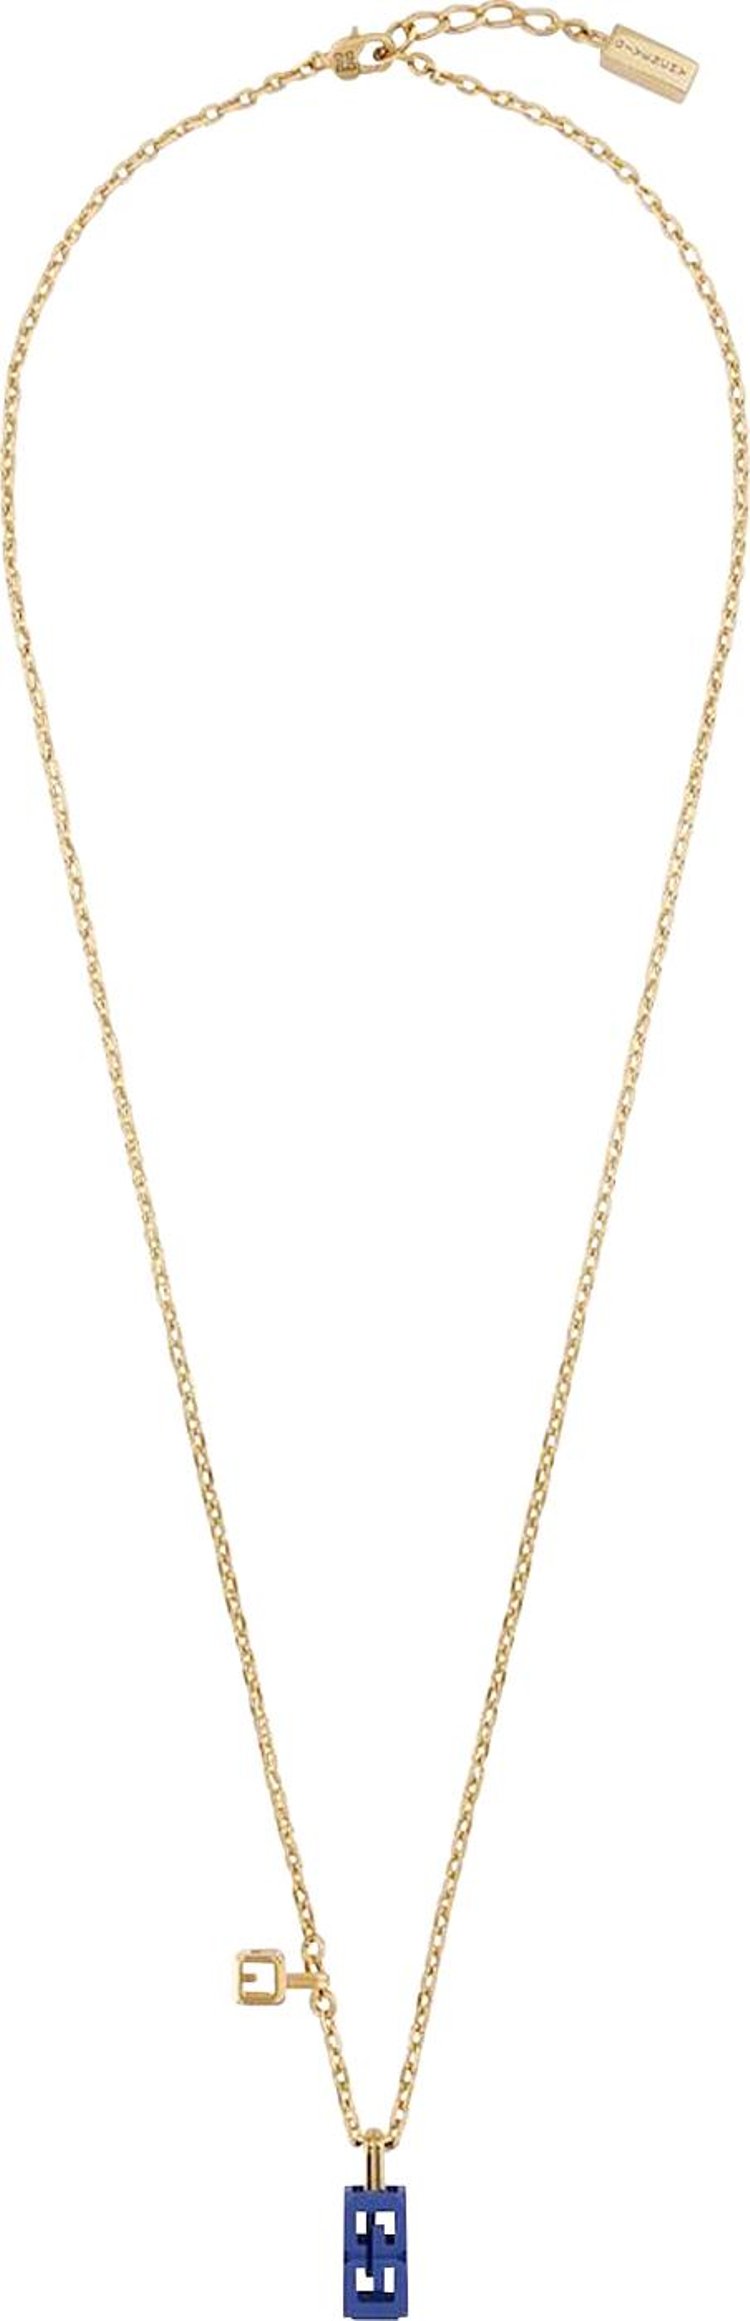 Givenchy Cube Necklace 'Royal Blue'